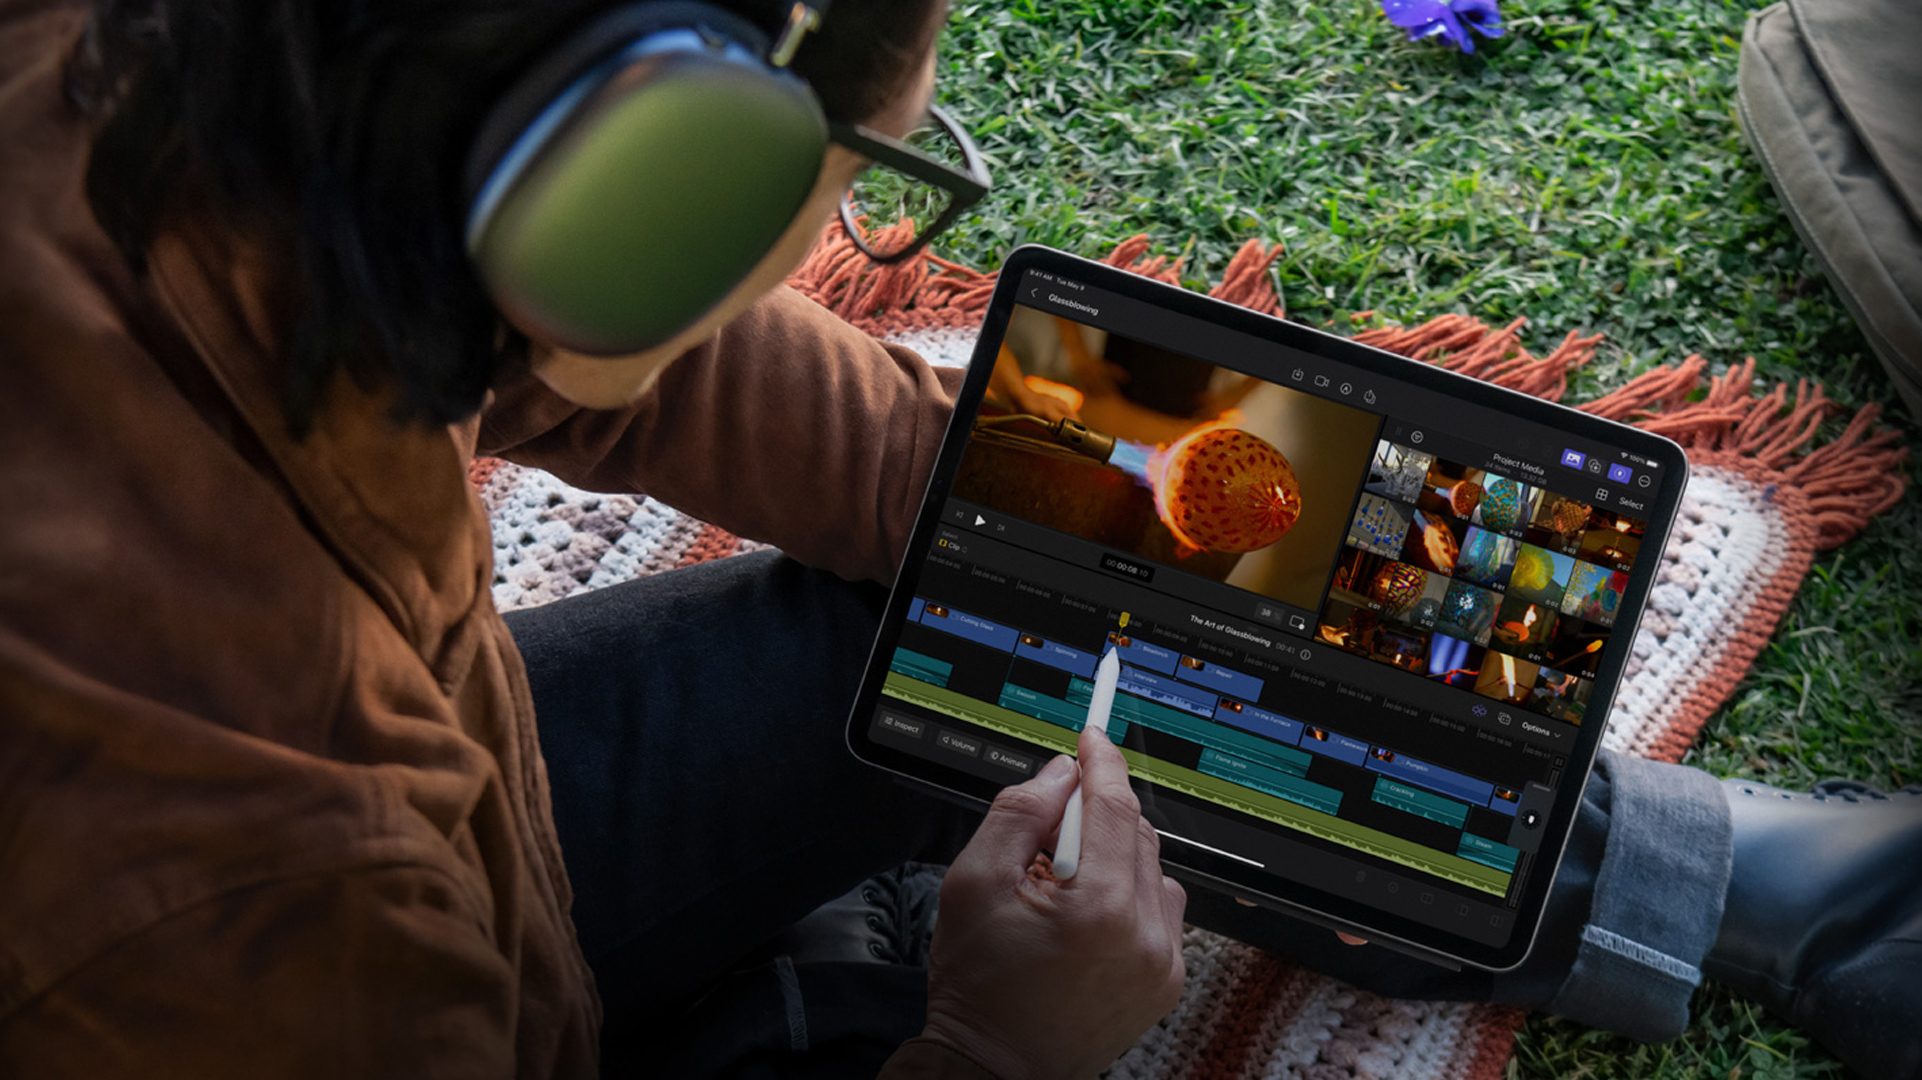 can you download final cut pro to an ipad